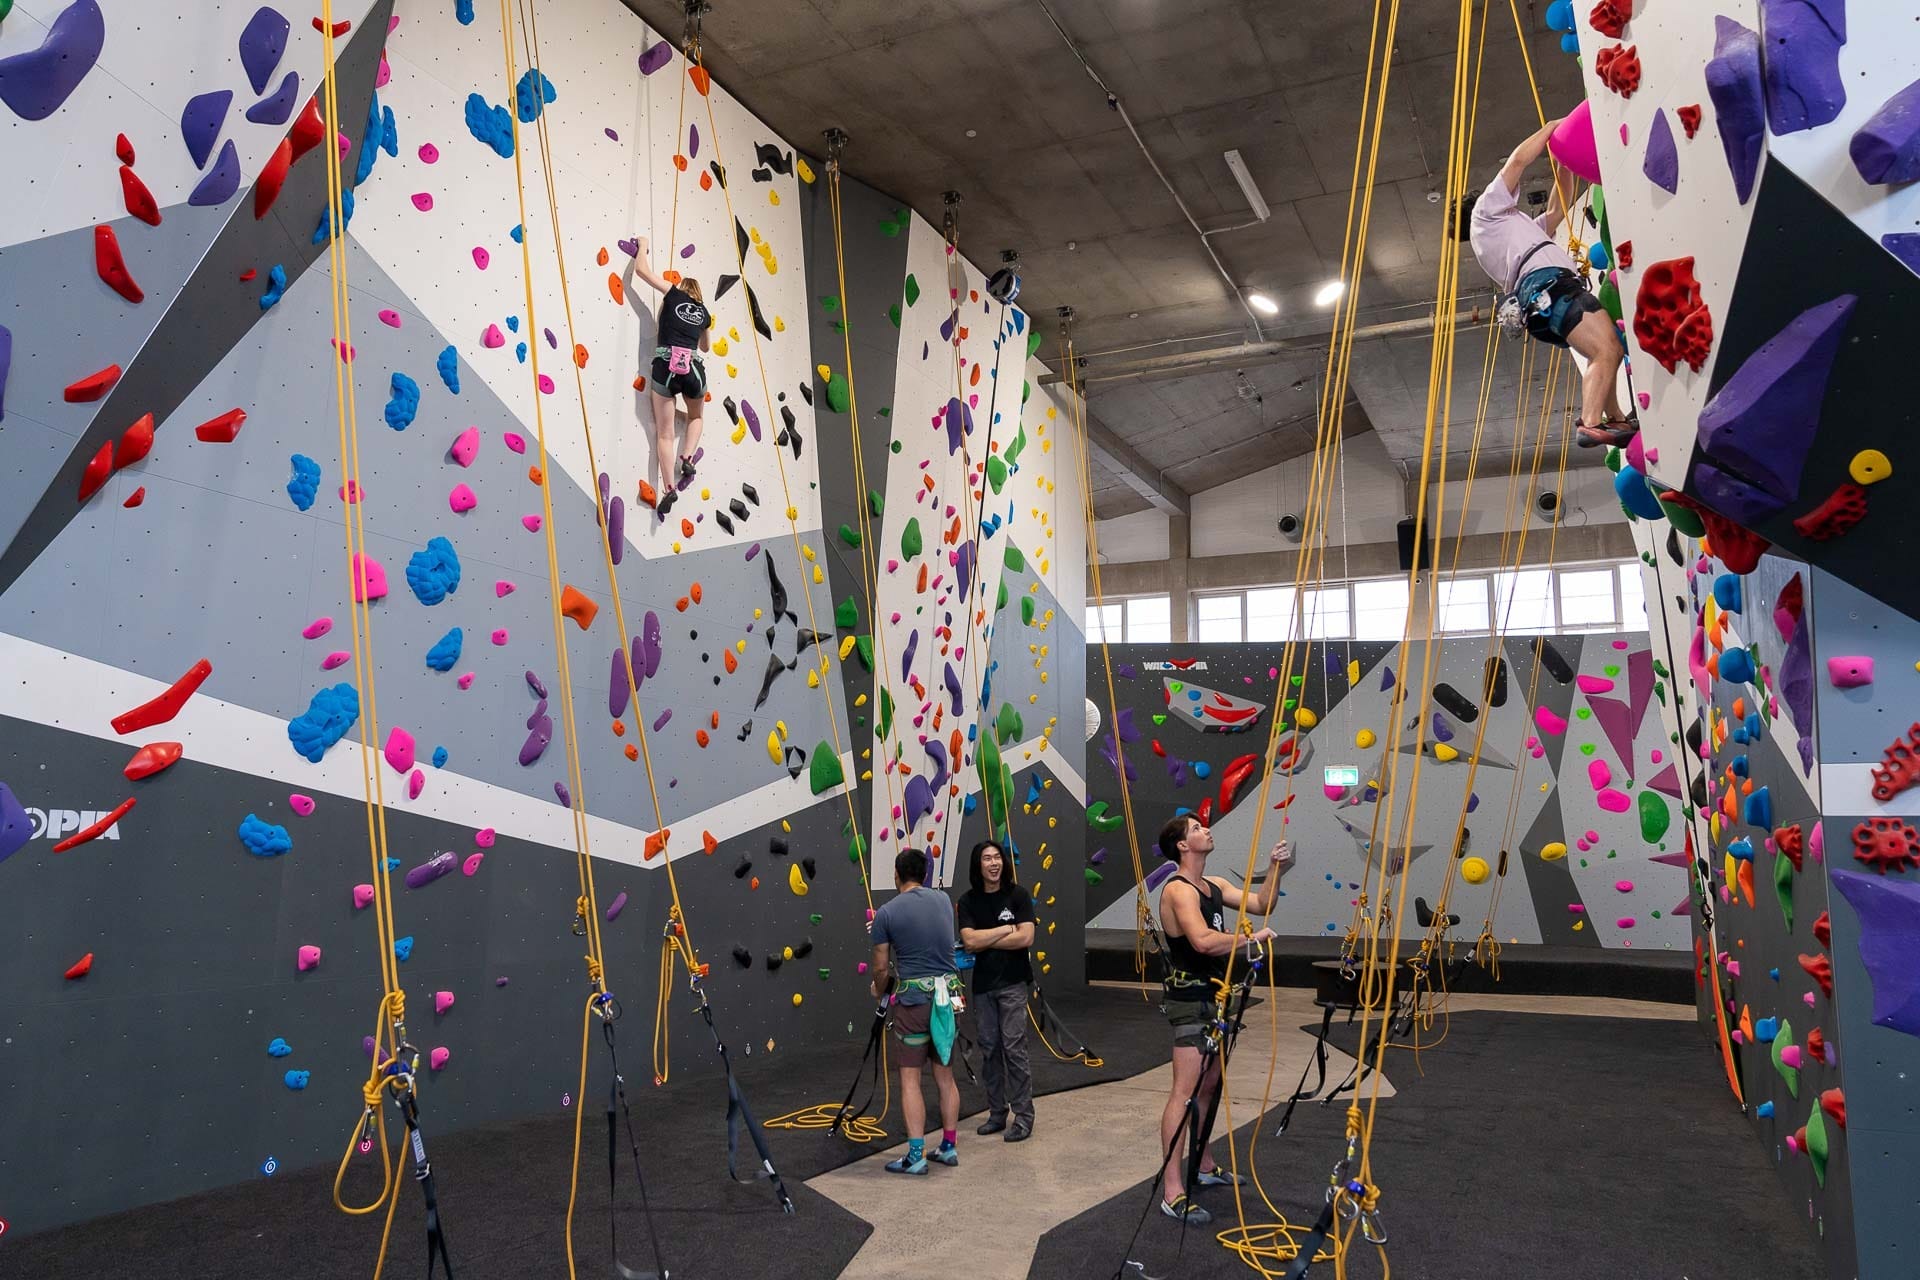 Sydney Has A New Rock Climbing Gym! (After A Two Year Wait), climb fit macquarie, top rope